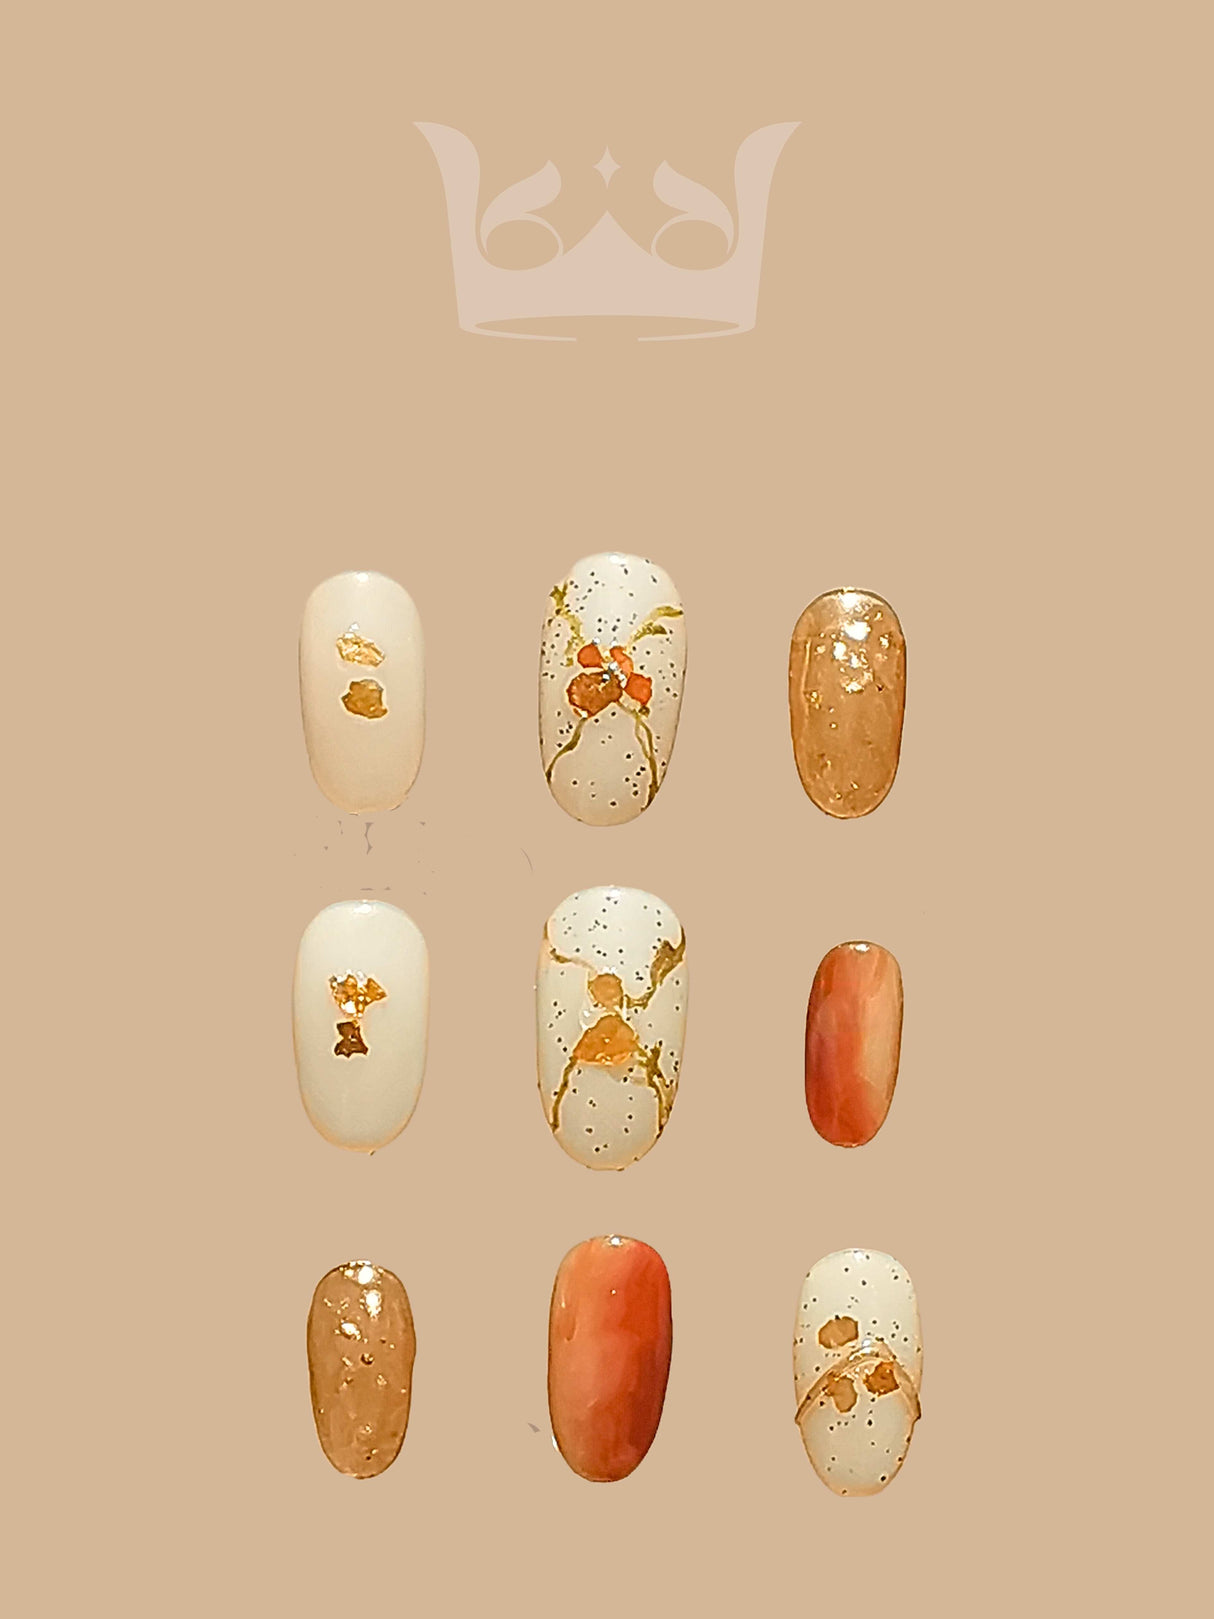 These cute nails are designed for special occasions with a color palette of gold and cream, glittery or metallic finishes, and cute elements. Ideal for adding glamour to events.